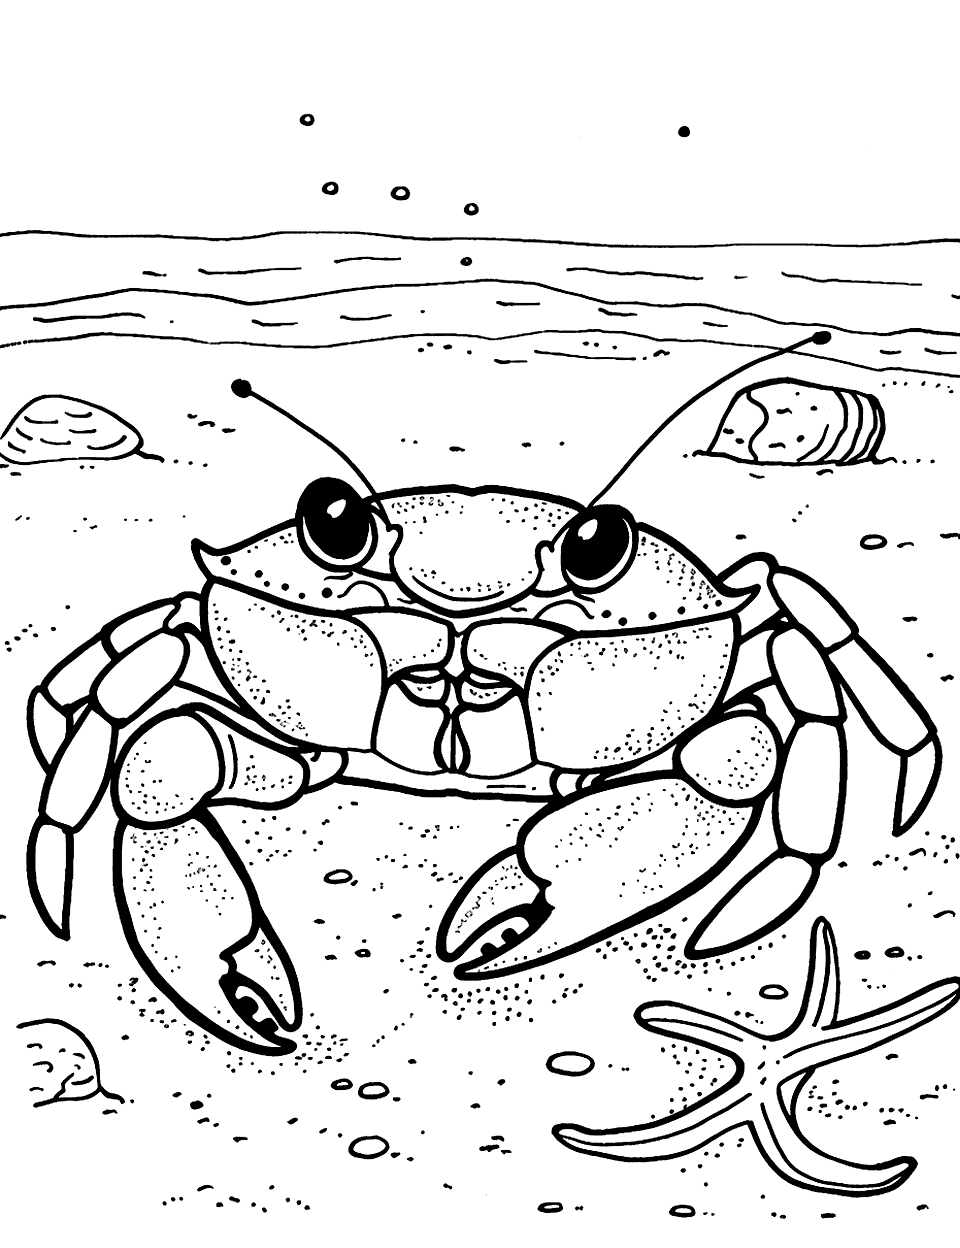 Baby Crab's First Walk Crab Coloring Page - A tiny, newborn crab taking its first cautious steps on the sandy beach.